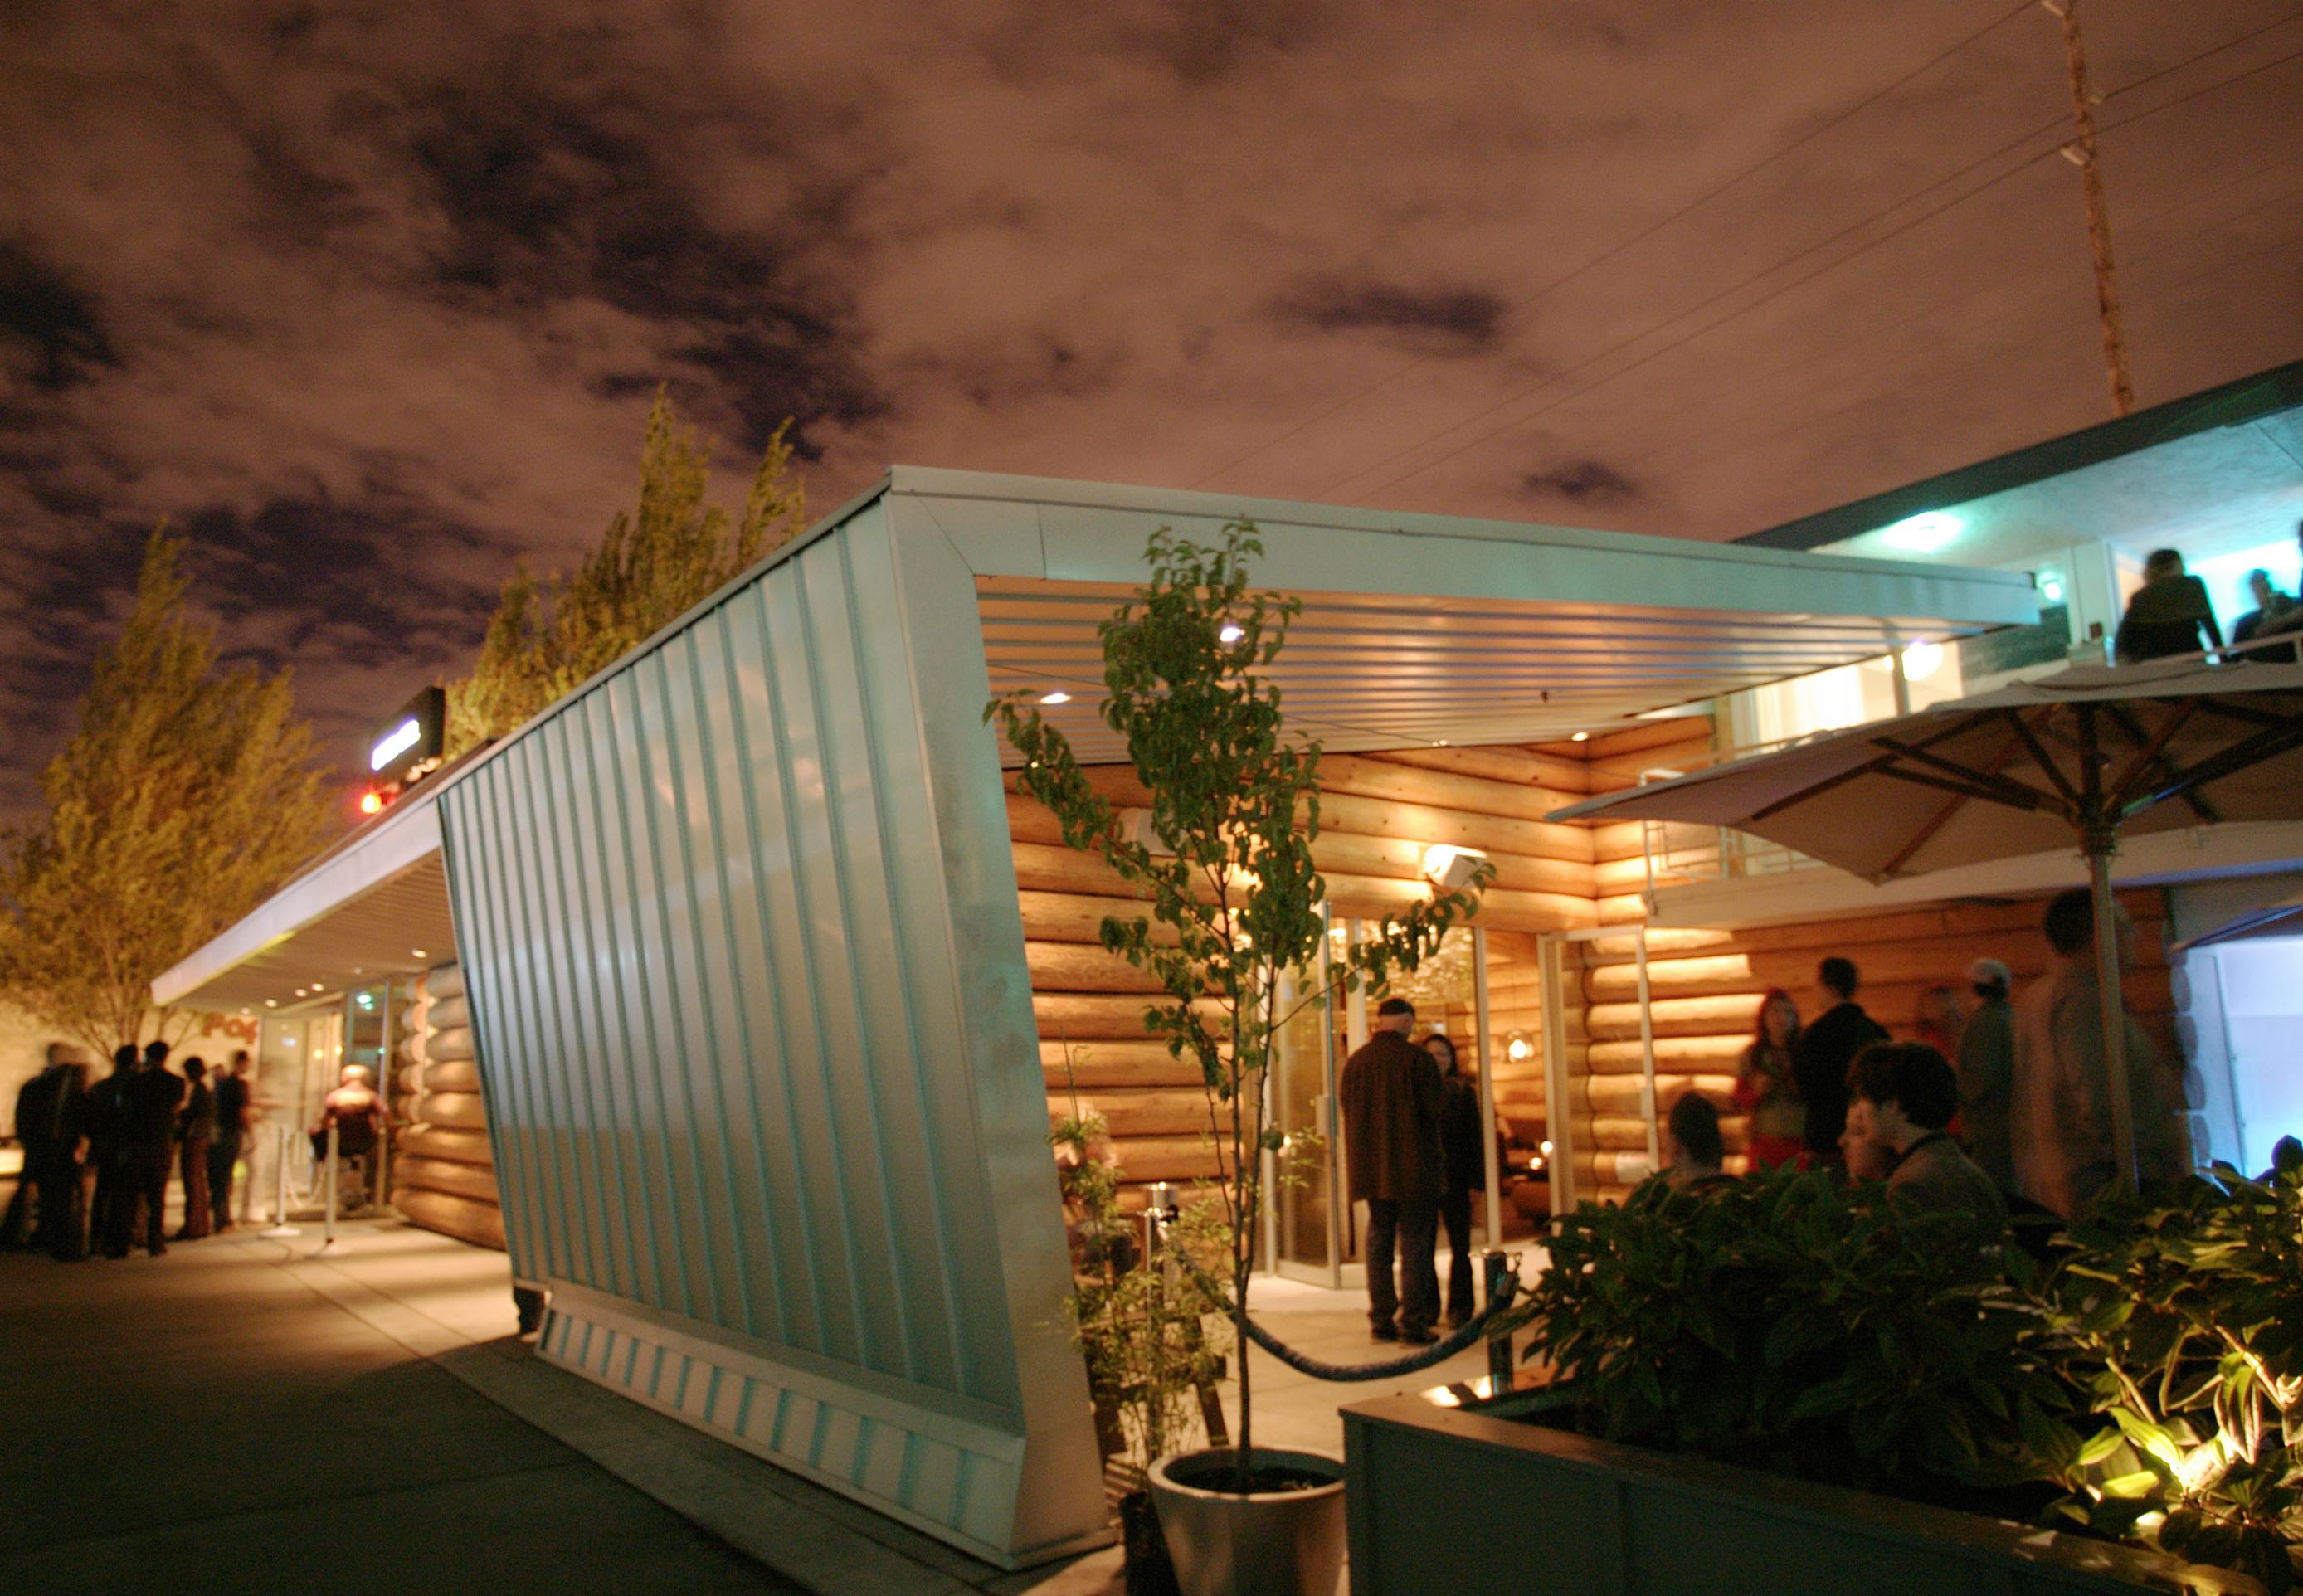 The Jupiter Hotel features the Doug Fir Lounge, an on-site restaurant, lounge and music venue, with shows 7 days a week.